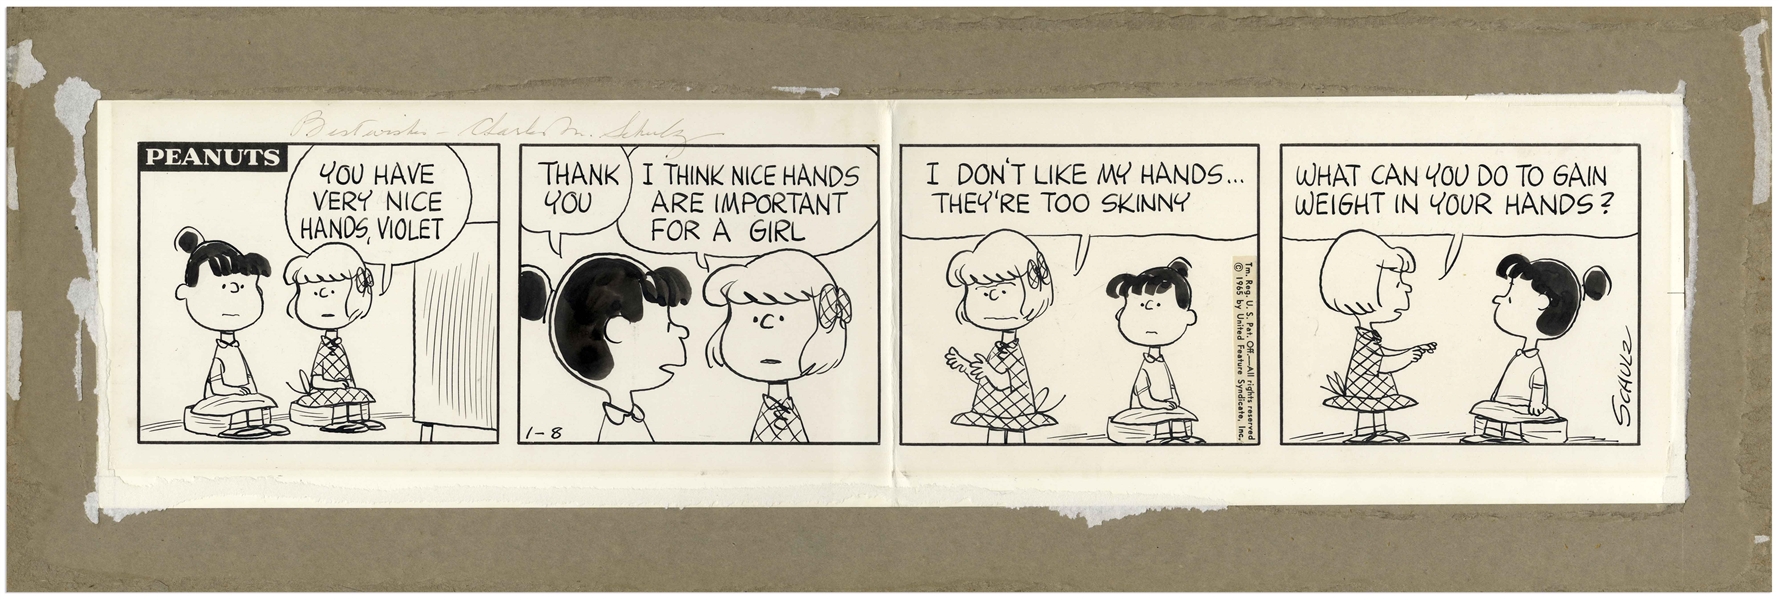 Charles Schulz Hand-Drawn ''Peanuts'' Comic Strip, From 1965 Featuring Violet & Patty